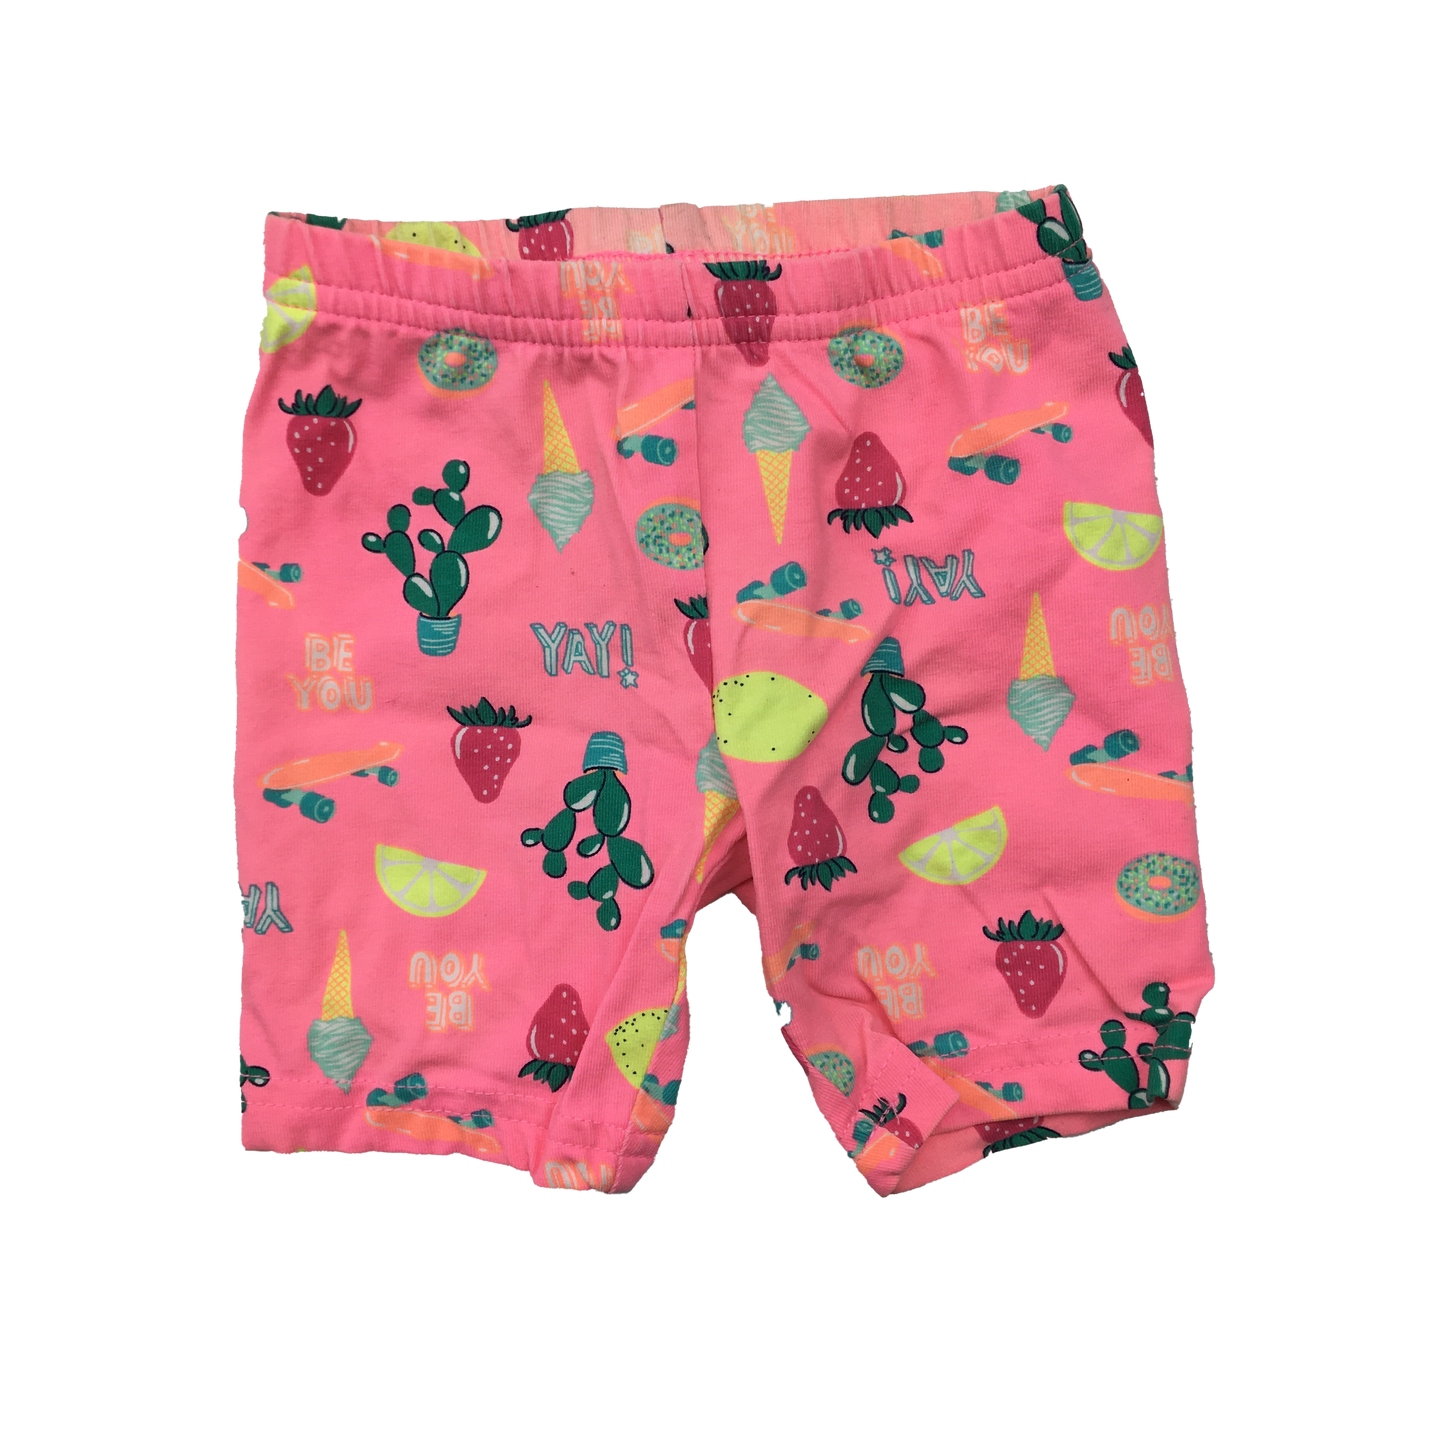 Carter's Pink Shorts with Cactus and Treats 12M